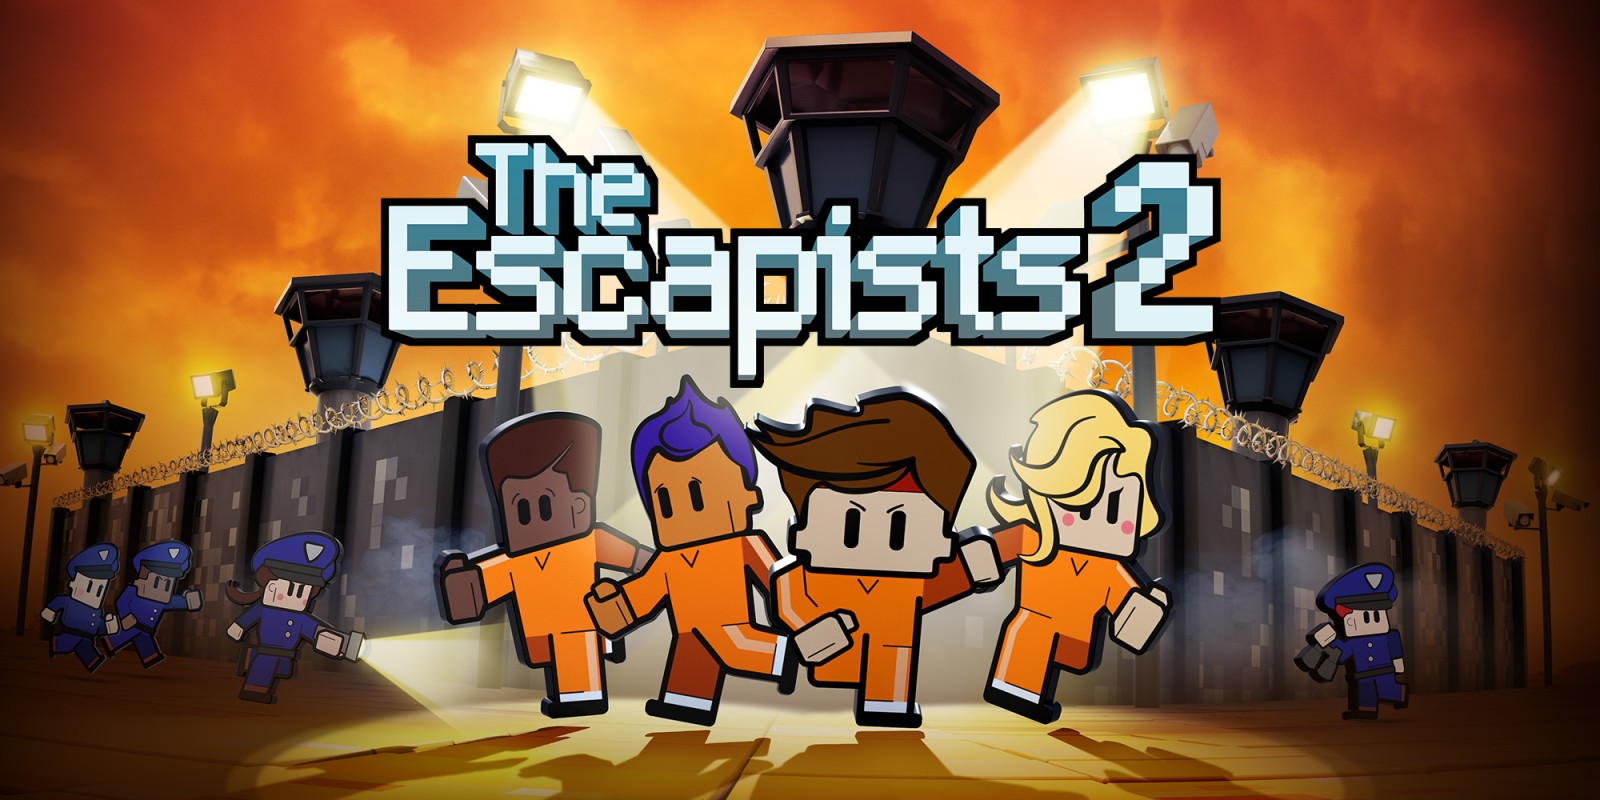 how to get escapist 2 free